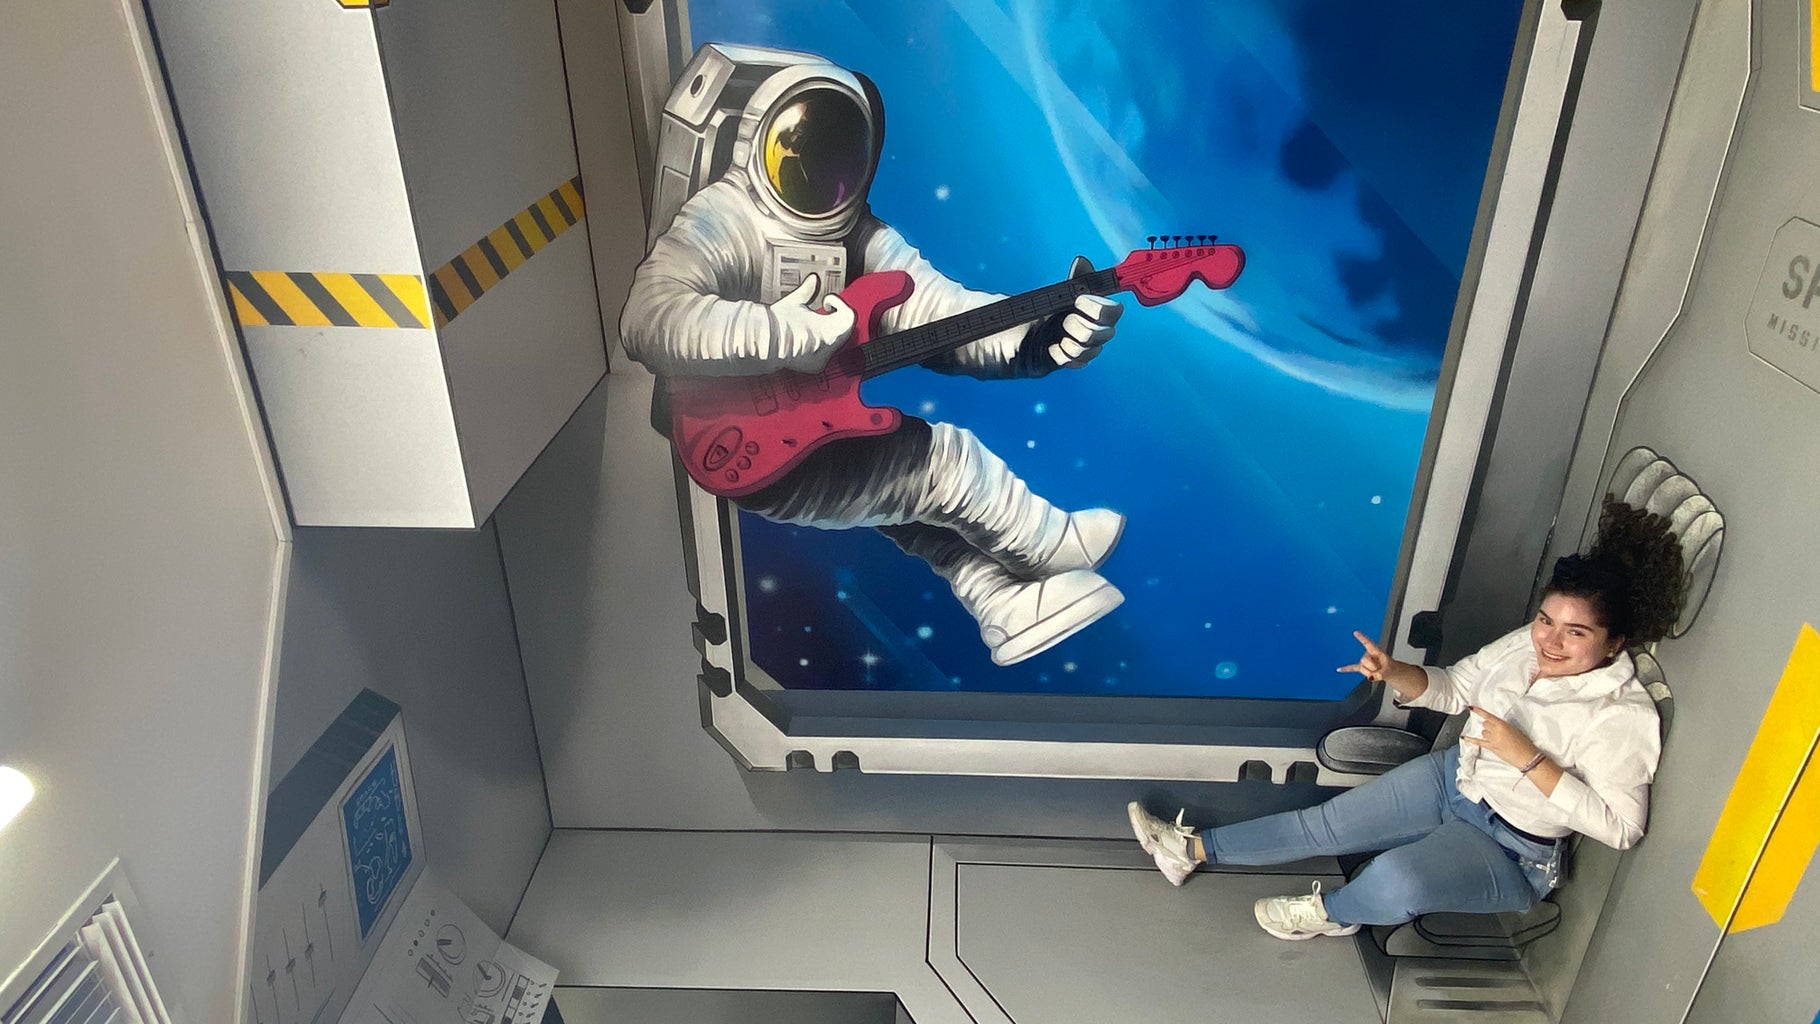 Girl posing with an art wall illusion of an astronaut in space